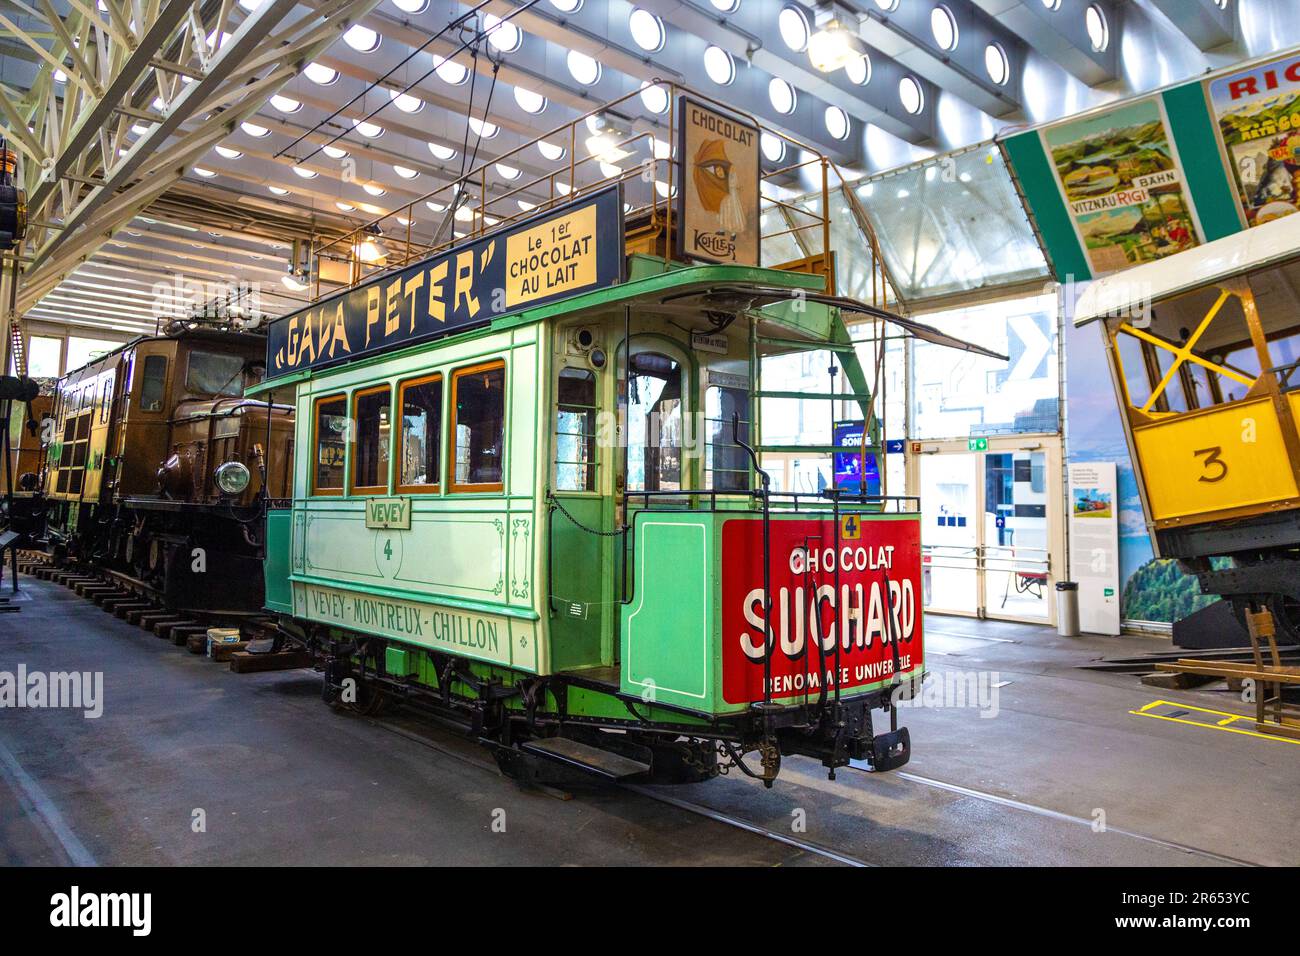 Electric tram motorcar Ce 1/2 1888 Vevey - Montreux - Chillon VMC Tram No.4 at the Swiss Museum of Transport, Lucerne, Switzerland Stock Photo